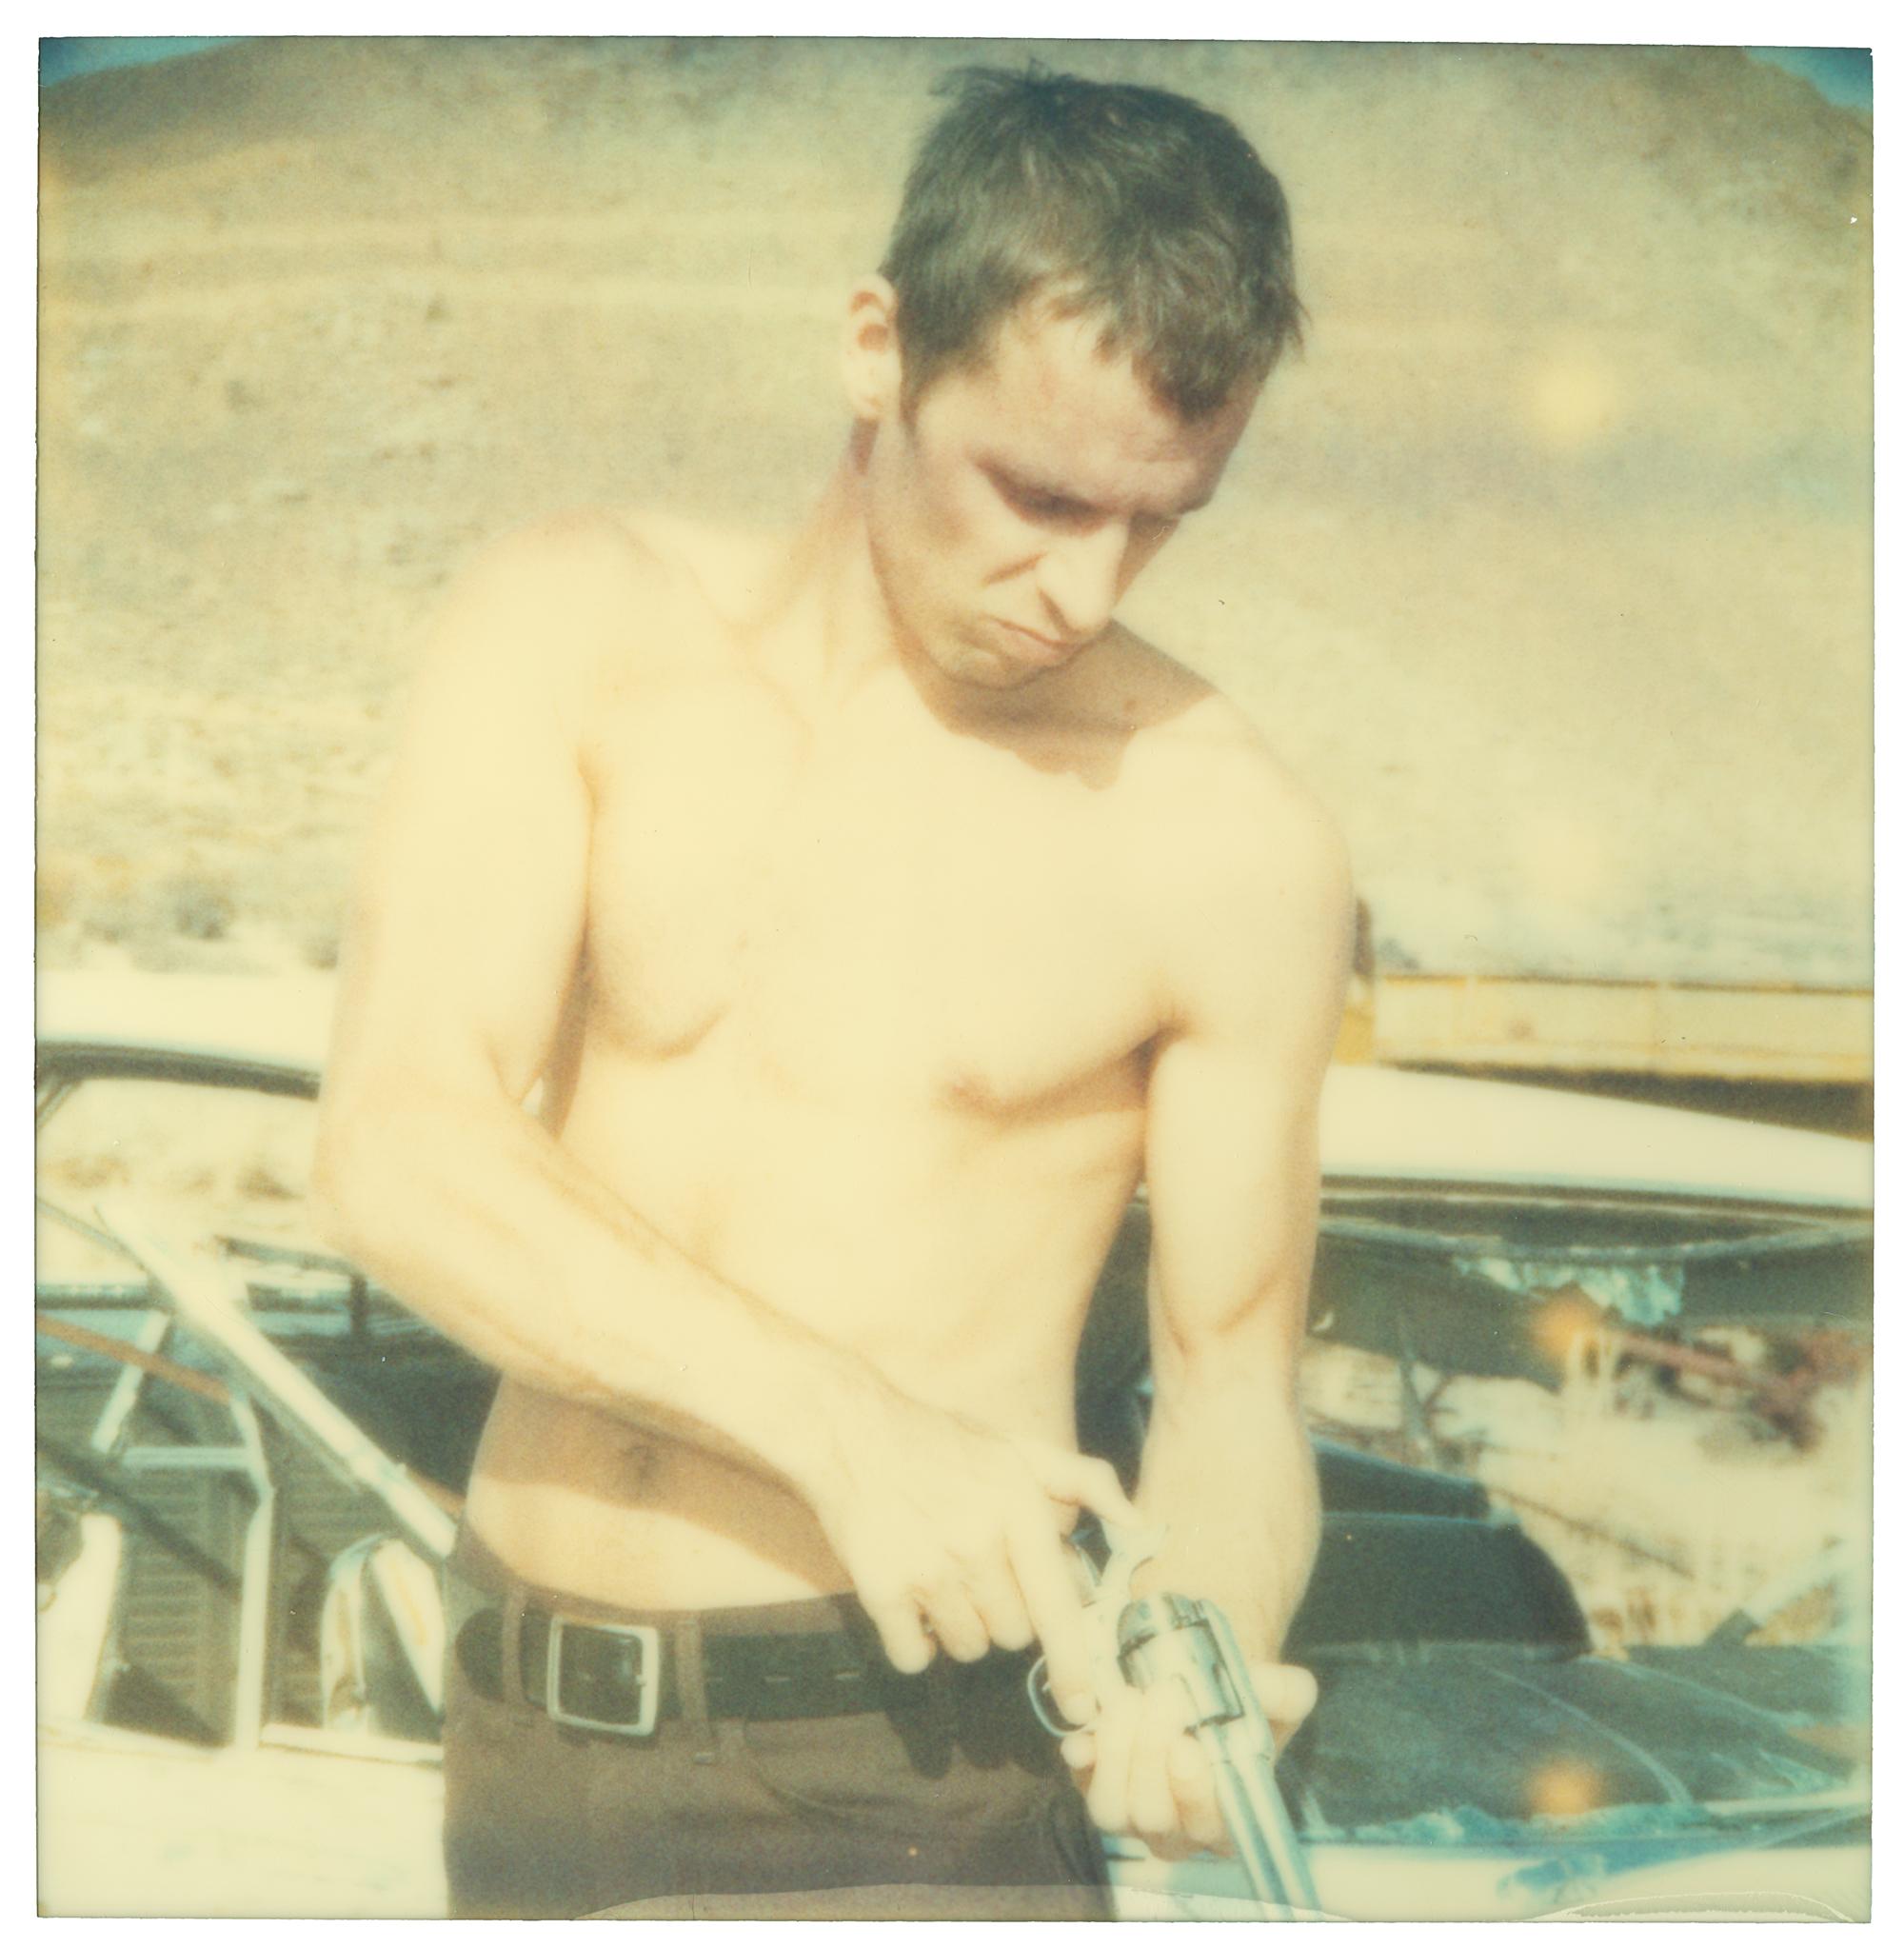 Loading the Gun (Wastelands), Edition 2/5 , 57x56cm, 2003
analog C-Print, hand-printed by the artist on Fuji Crystal Archive Paper,
based on an expired Polaroid, Artist inventory Number 1234.02,
mounted on Aluminum with matte UV-Protection, signed